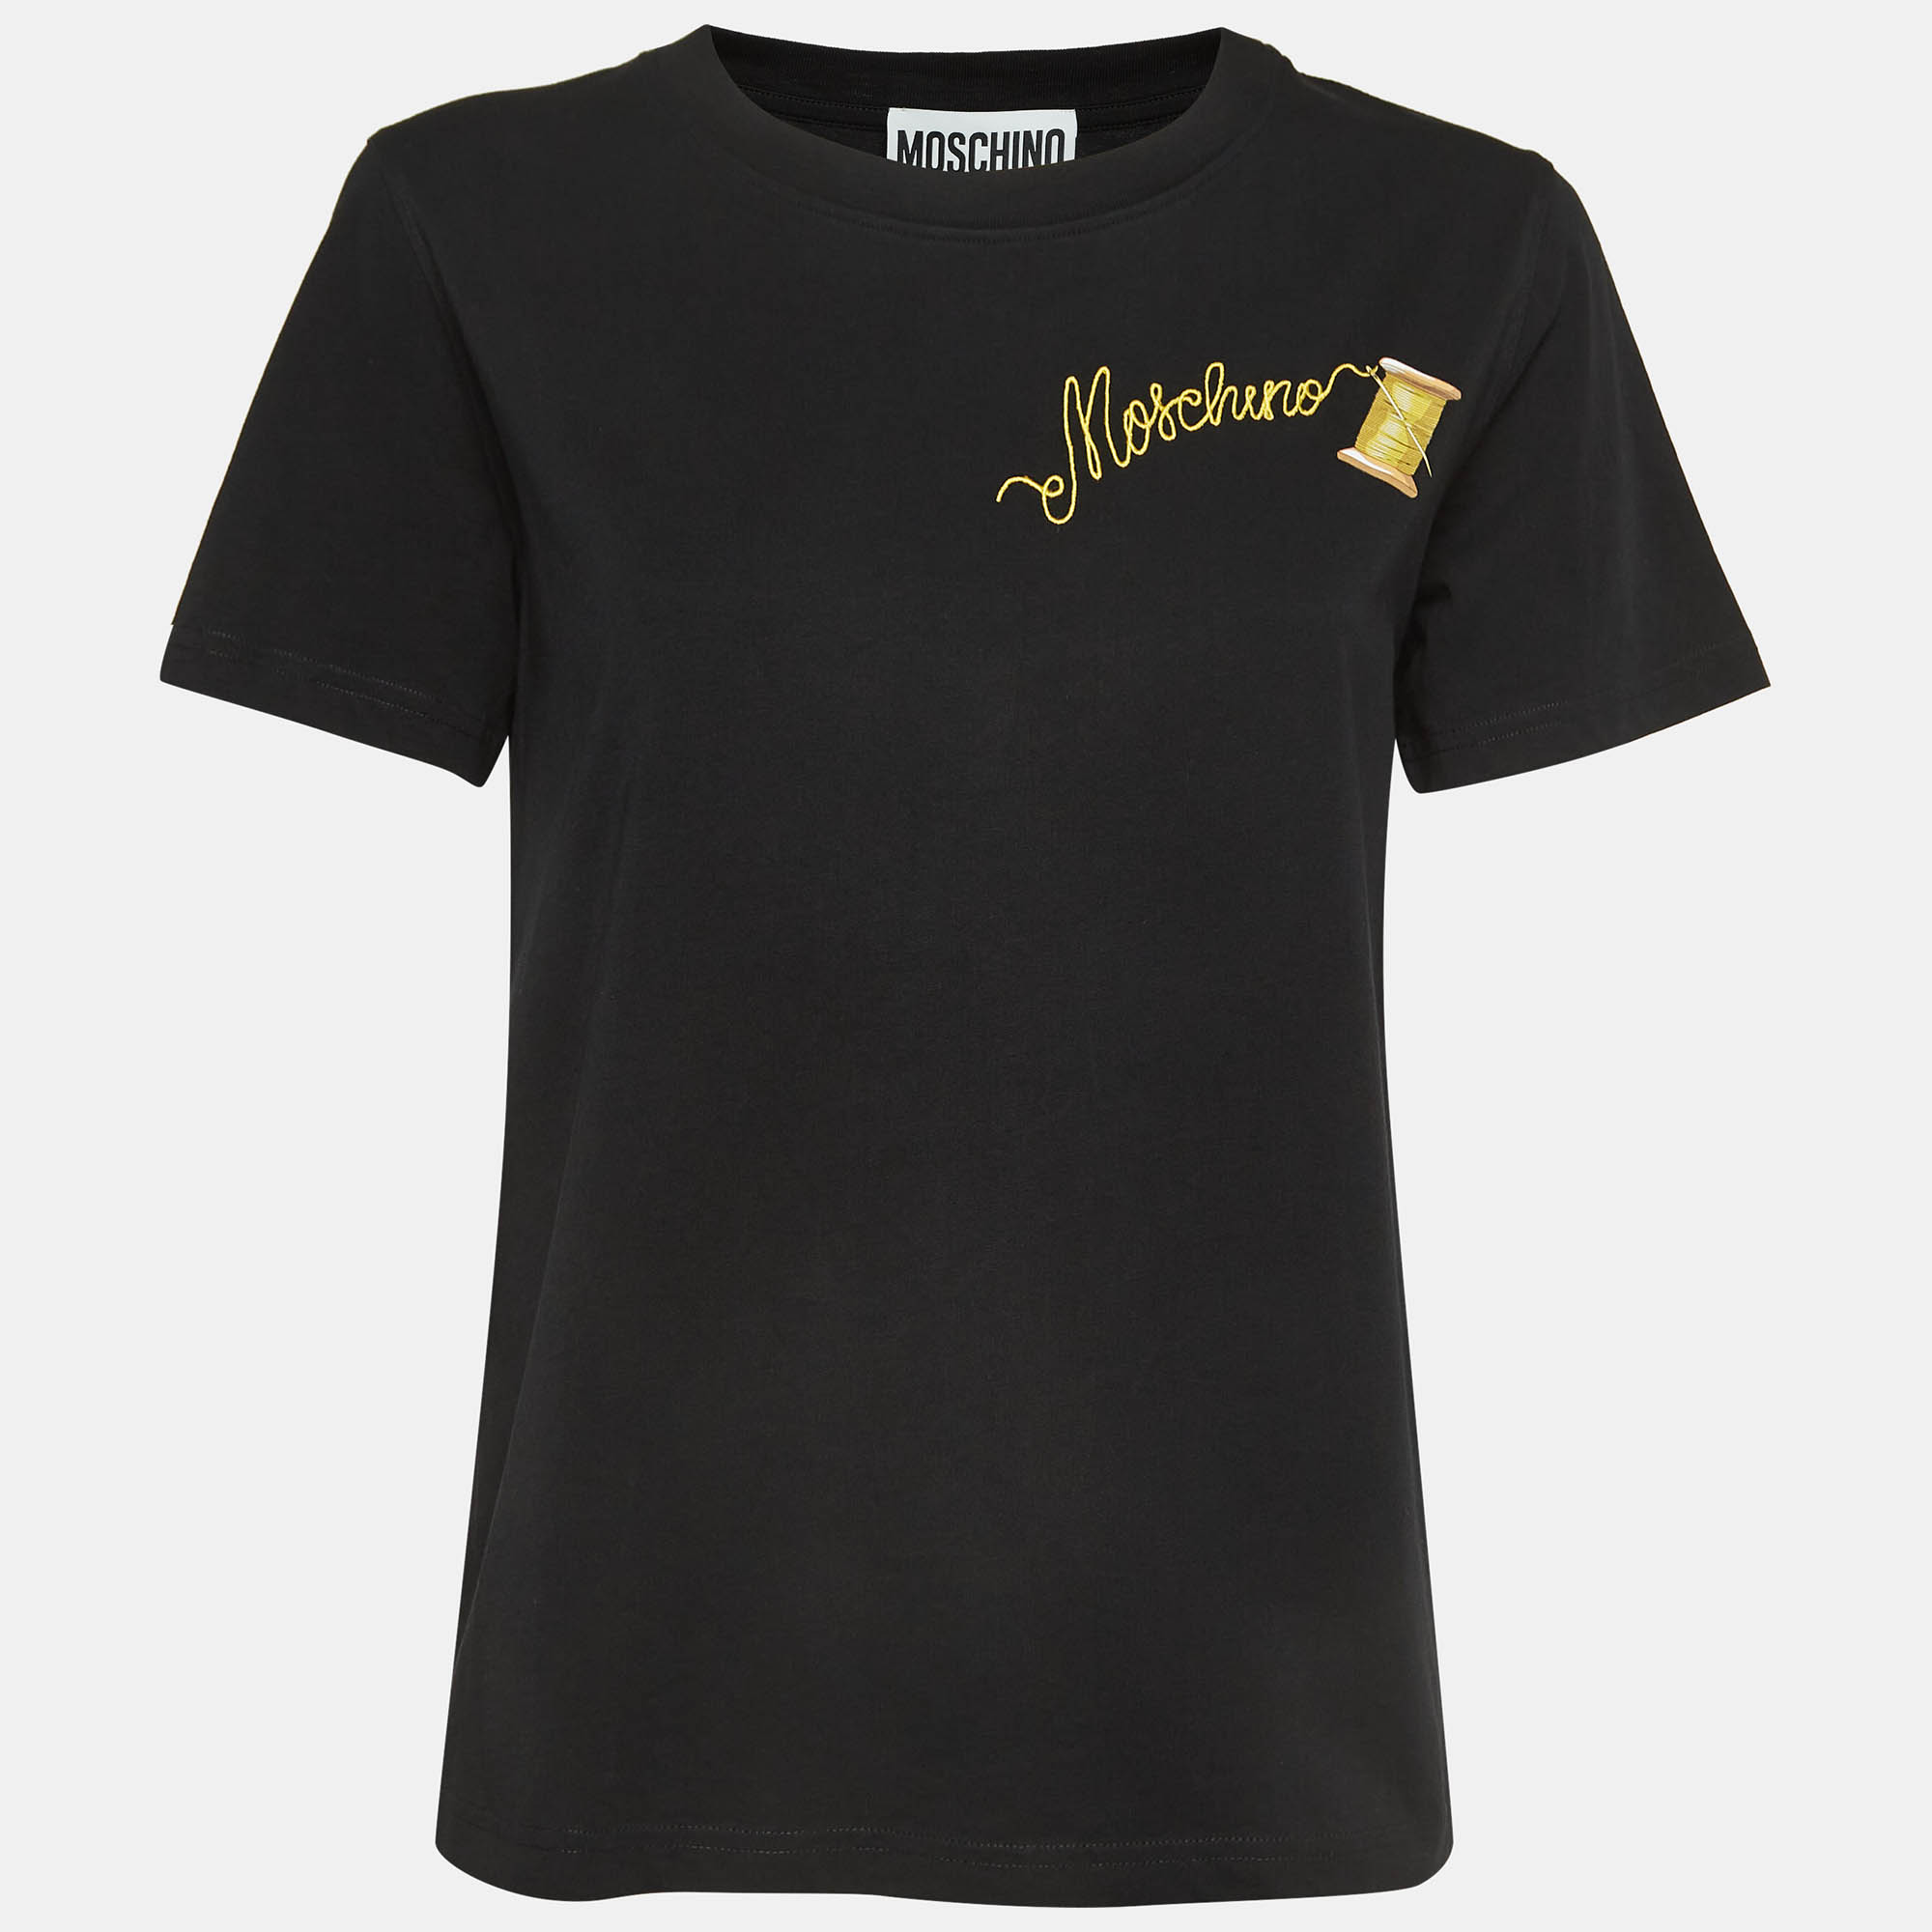 Perfect for casual outings or errands this T shirt is the best piece to feel comfortable and stylish in. It flaunts a catchy shade and a relaxed fit.